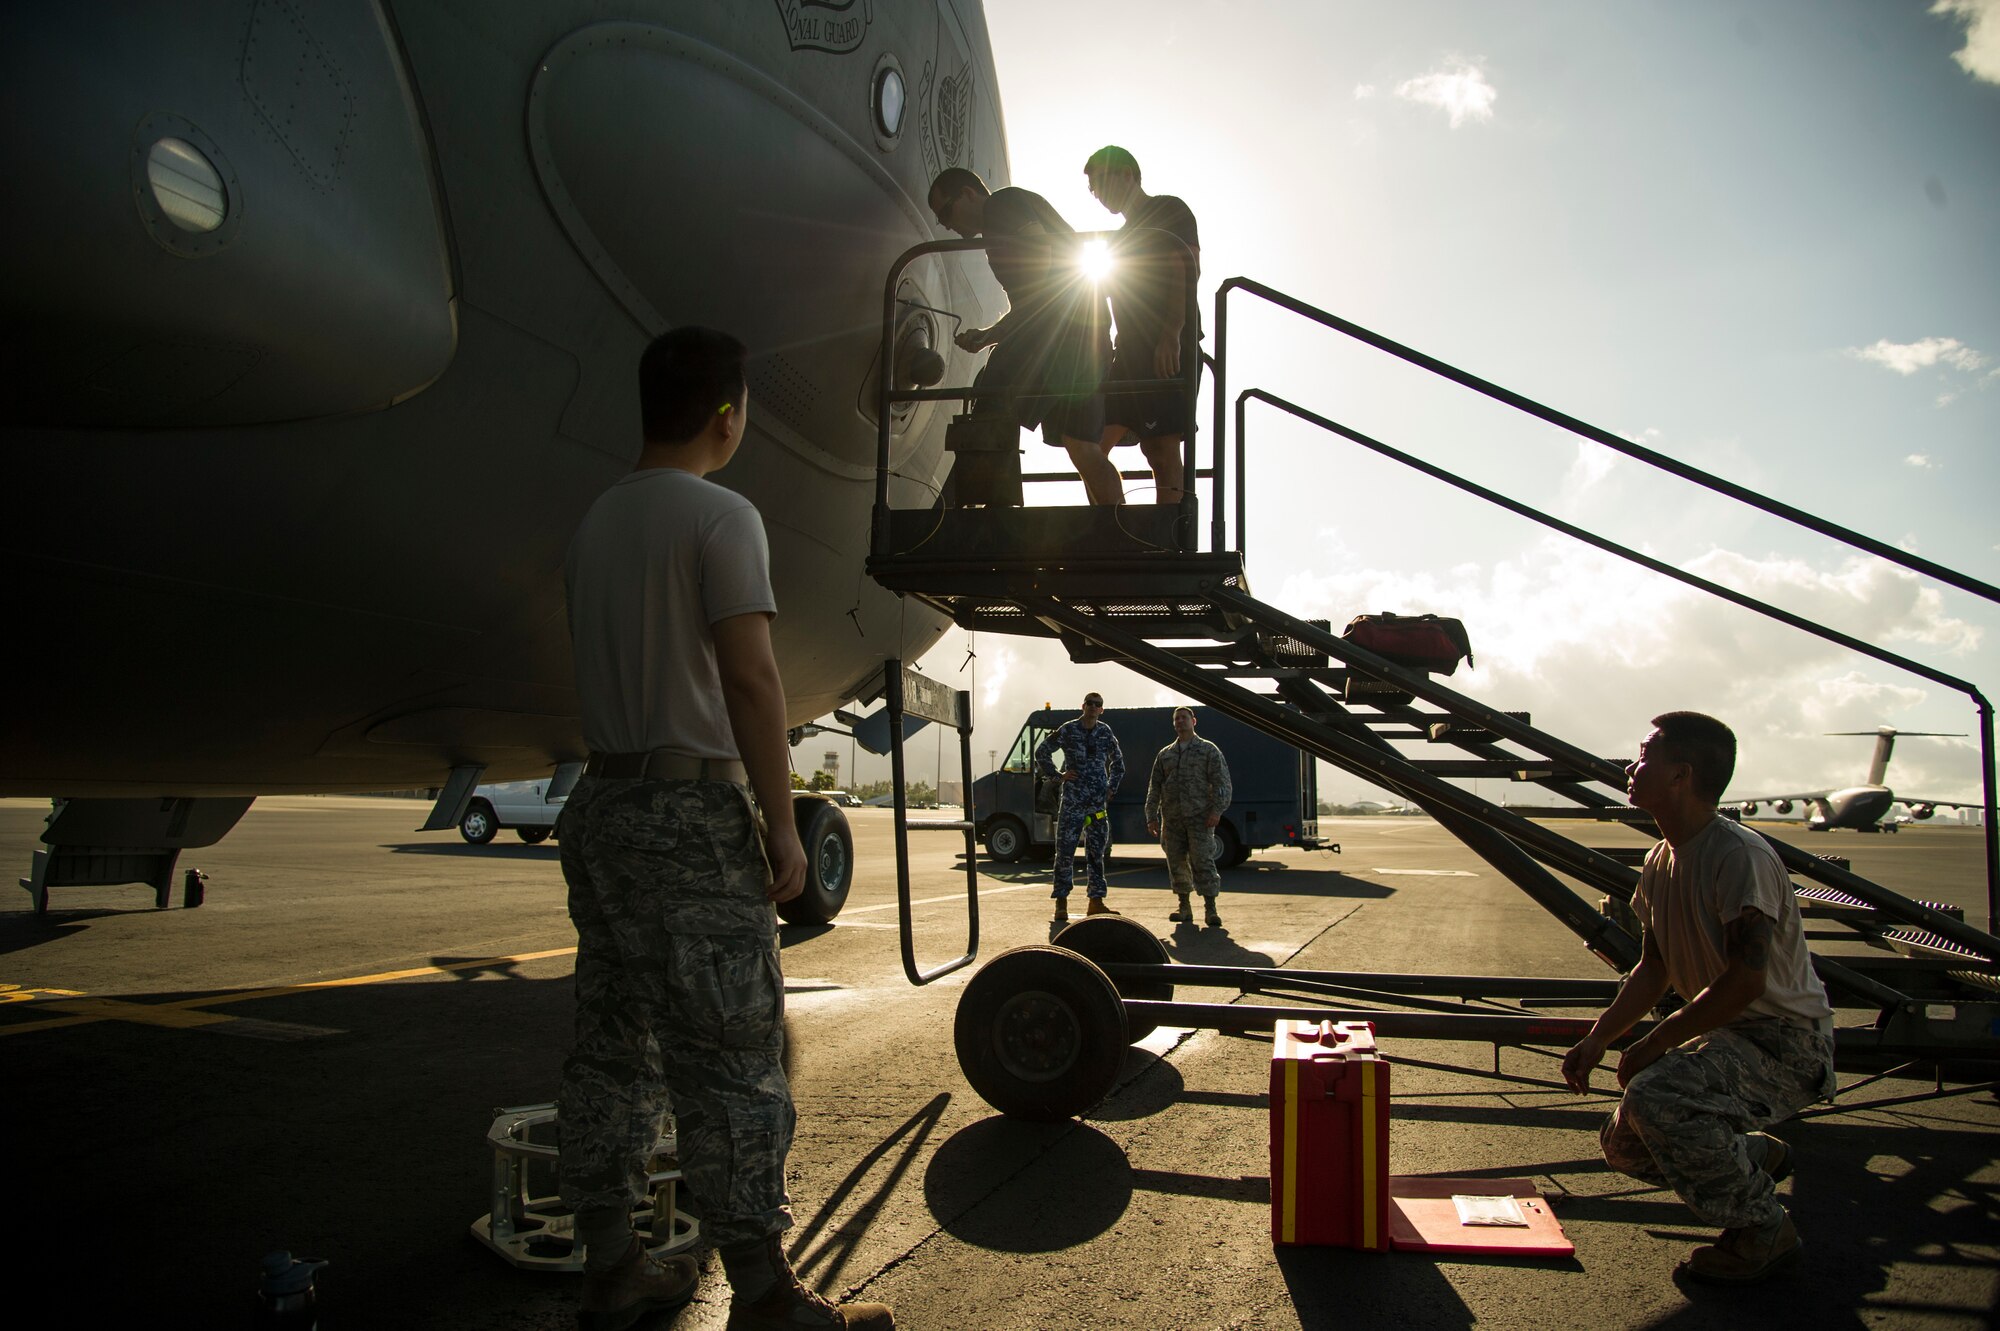 Maintainers from the 15th Maintenance Group and members from the 36th Squadron from Royal Australian Air Force Base Amberley, perform maintenance on a C-17 Globemaster on Joint Base Pearl Harbor-Hickam, Hawaii, July 12, 2017.